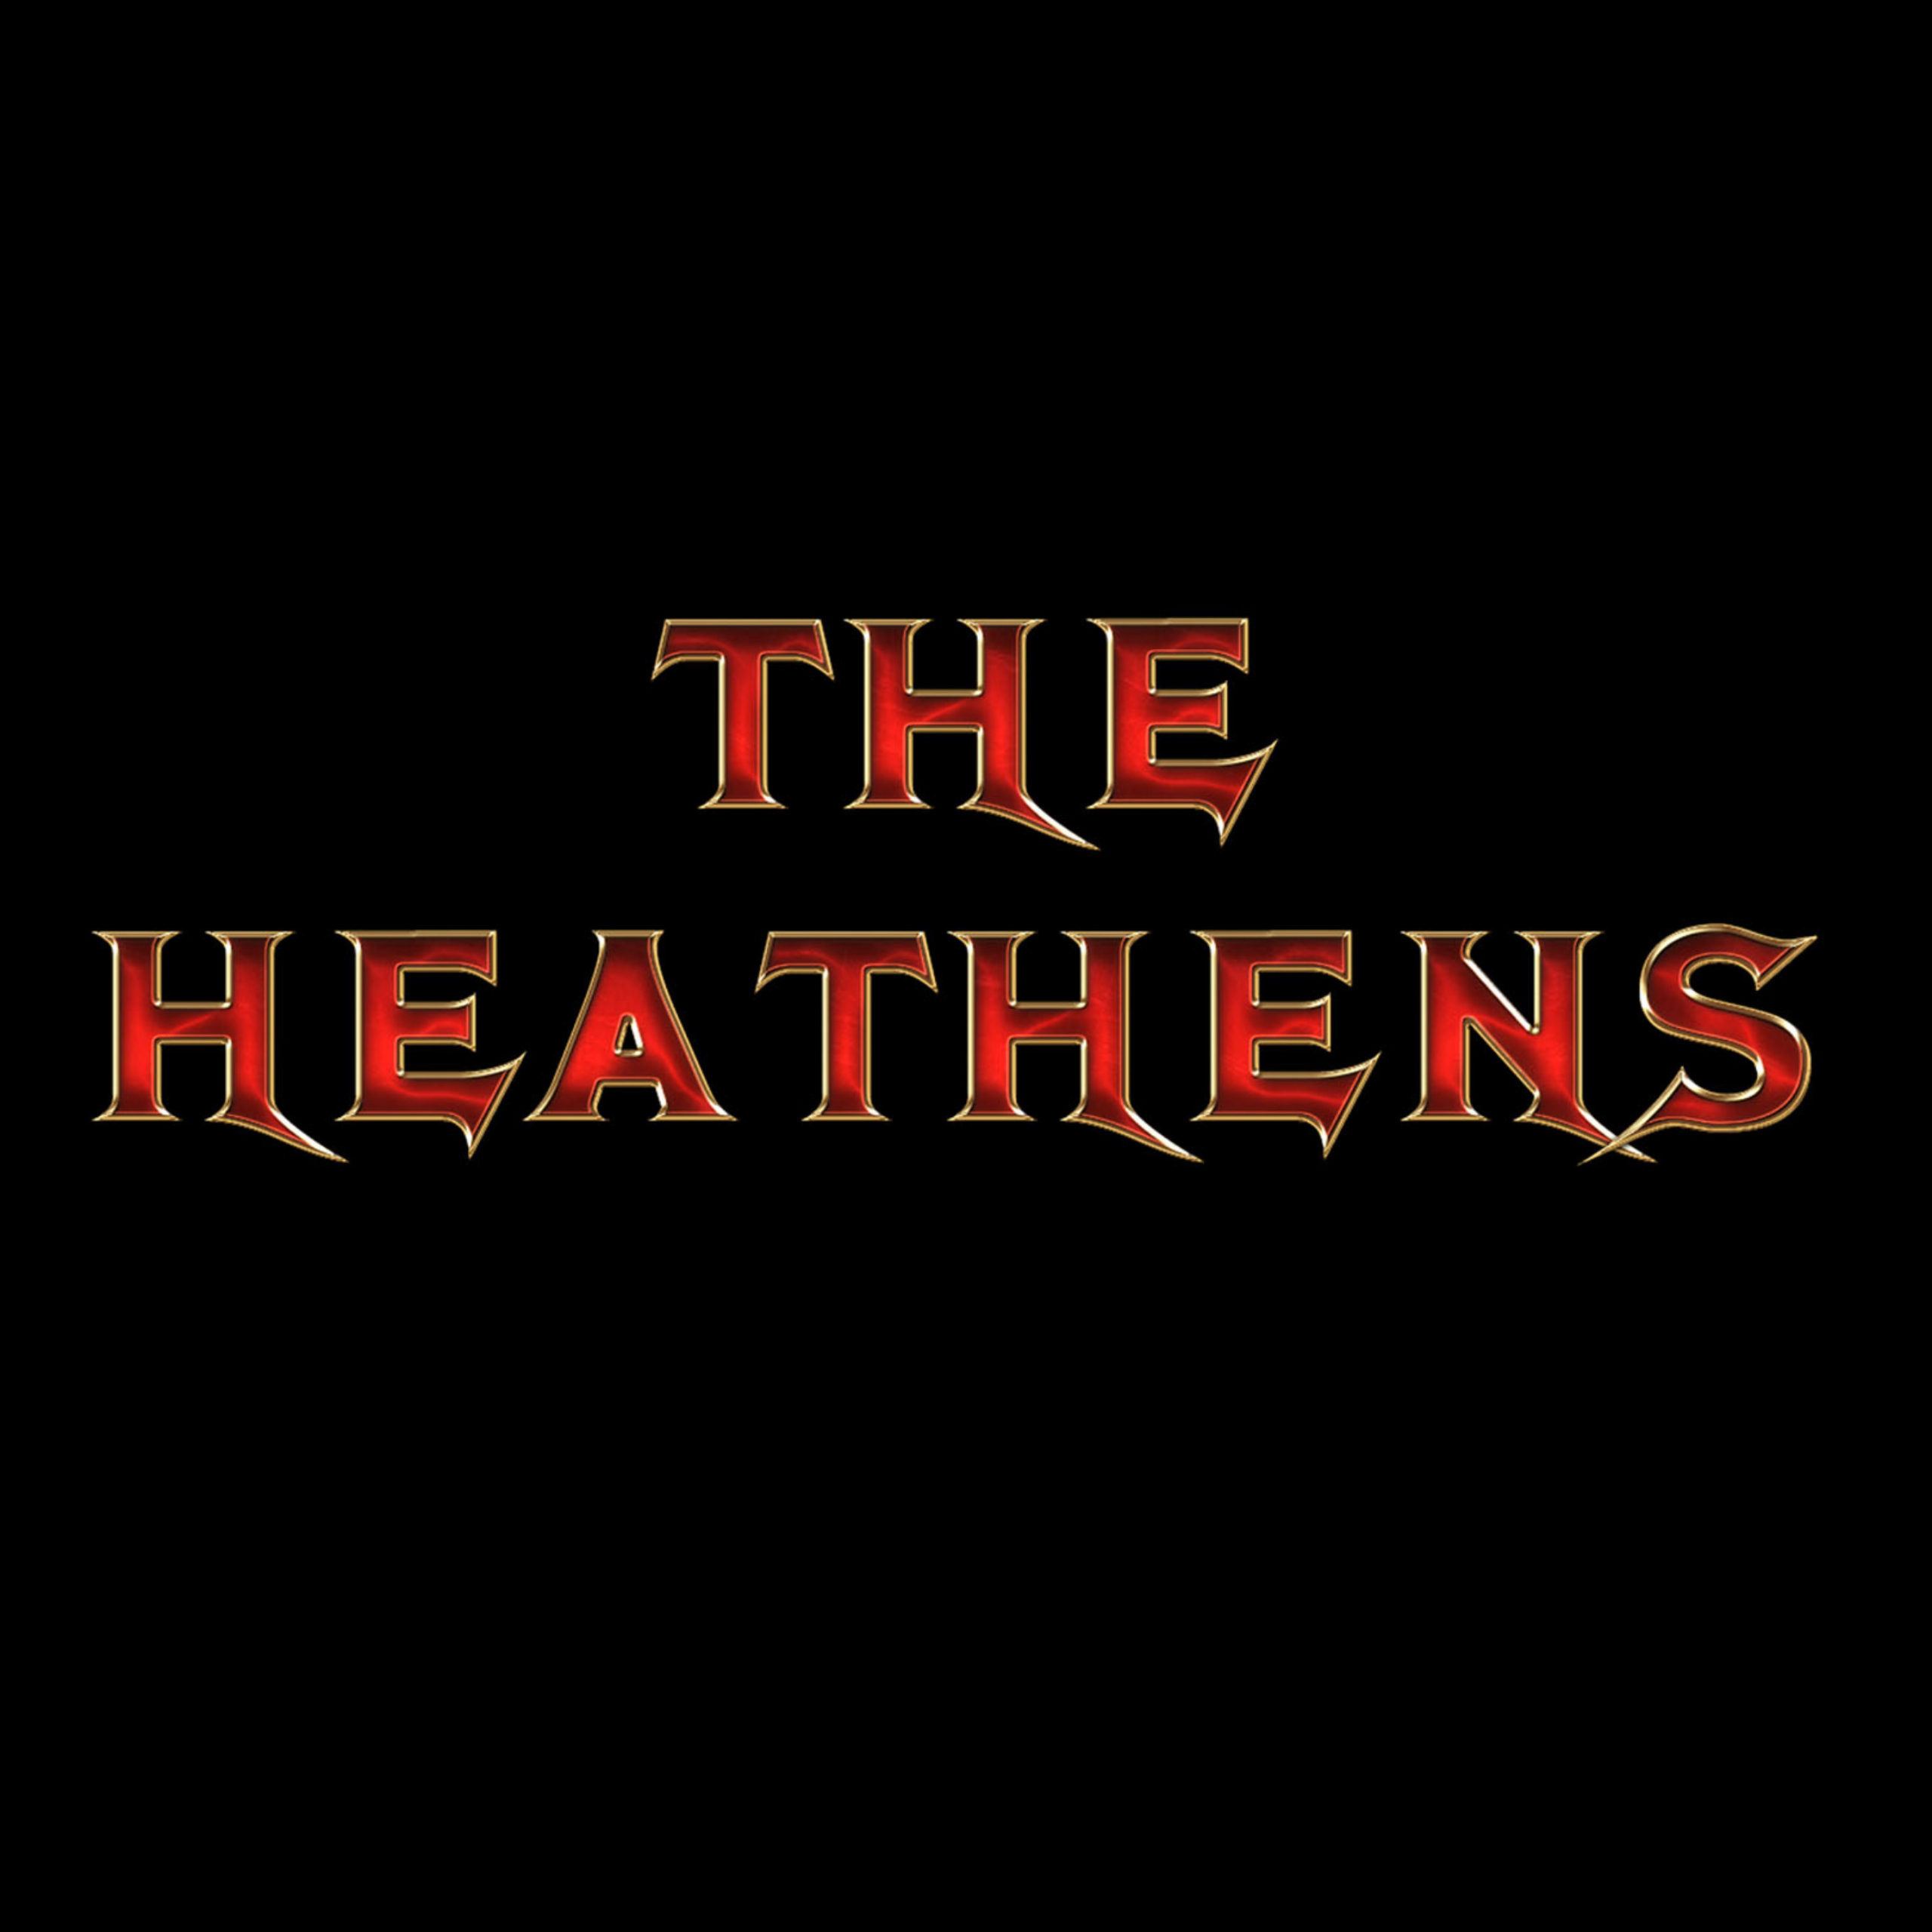 The Heathens Square My project